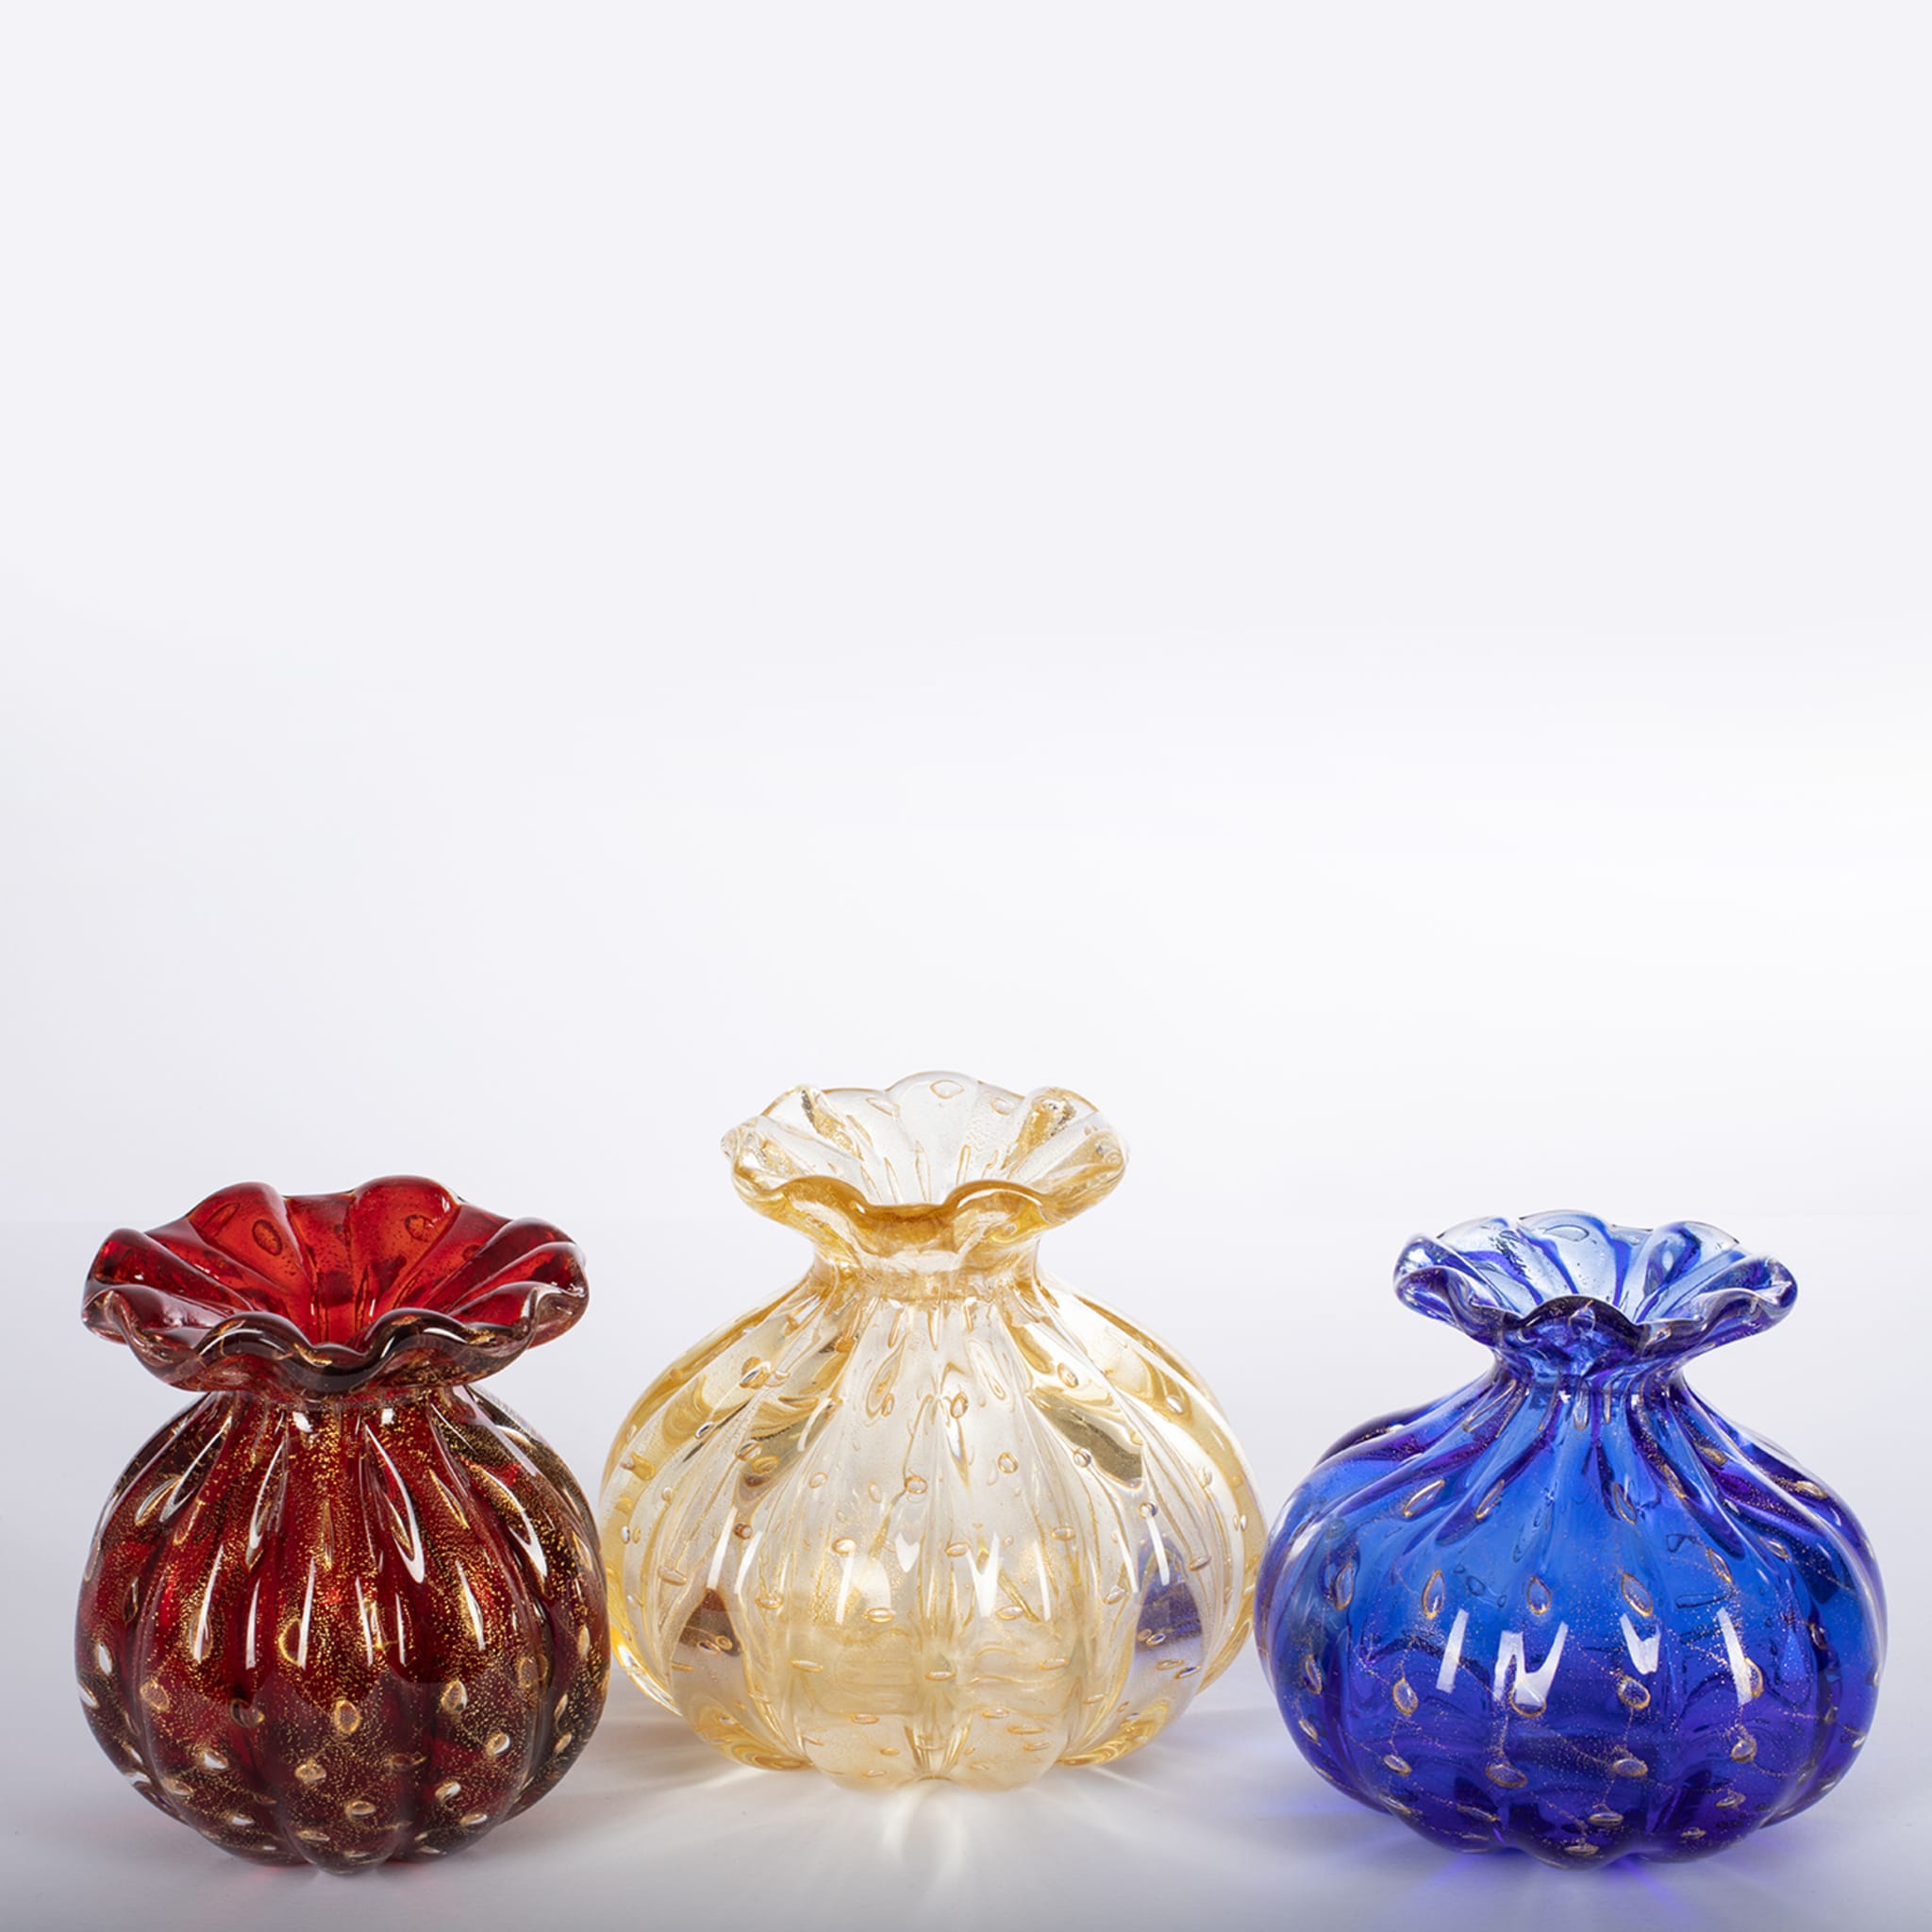 1950 Polychrome Set of 3 Vases with Gold Bubbles - Alternative view 3